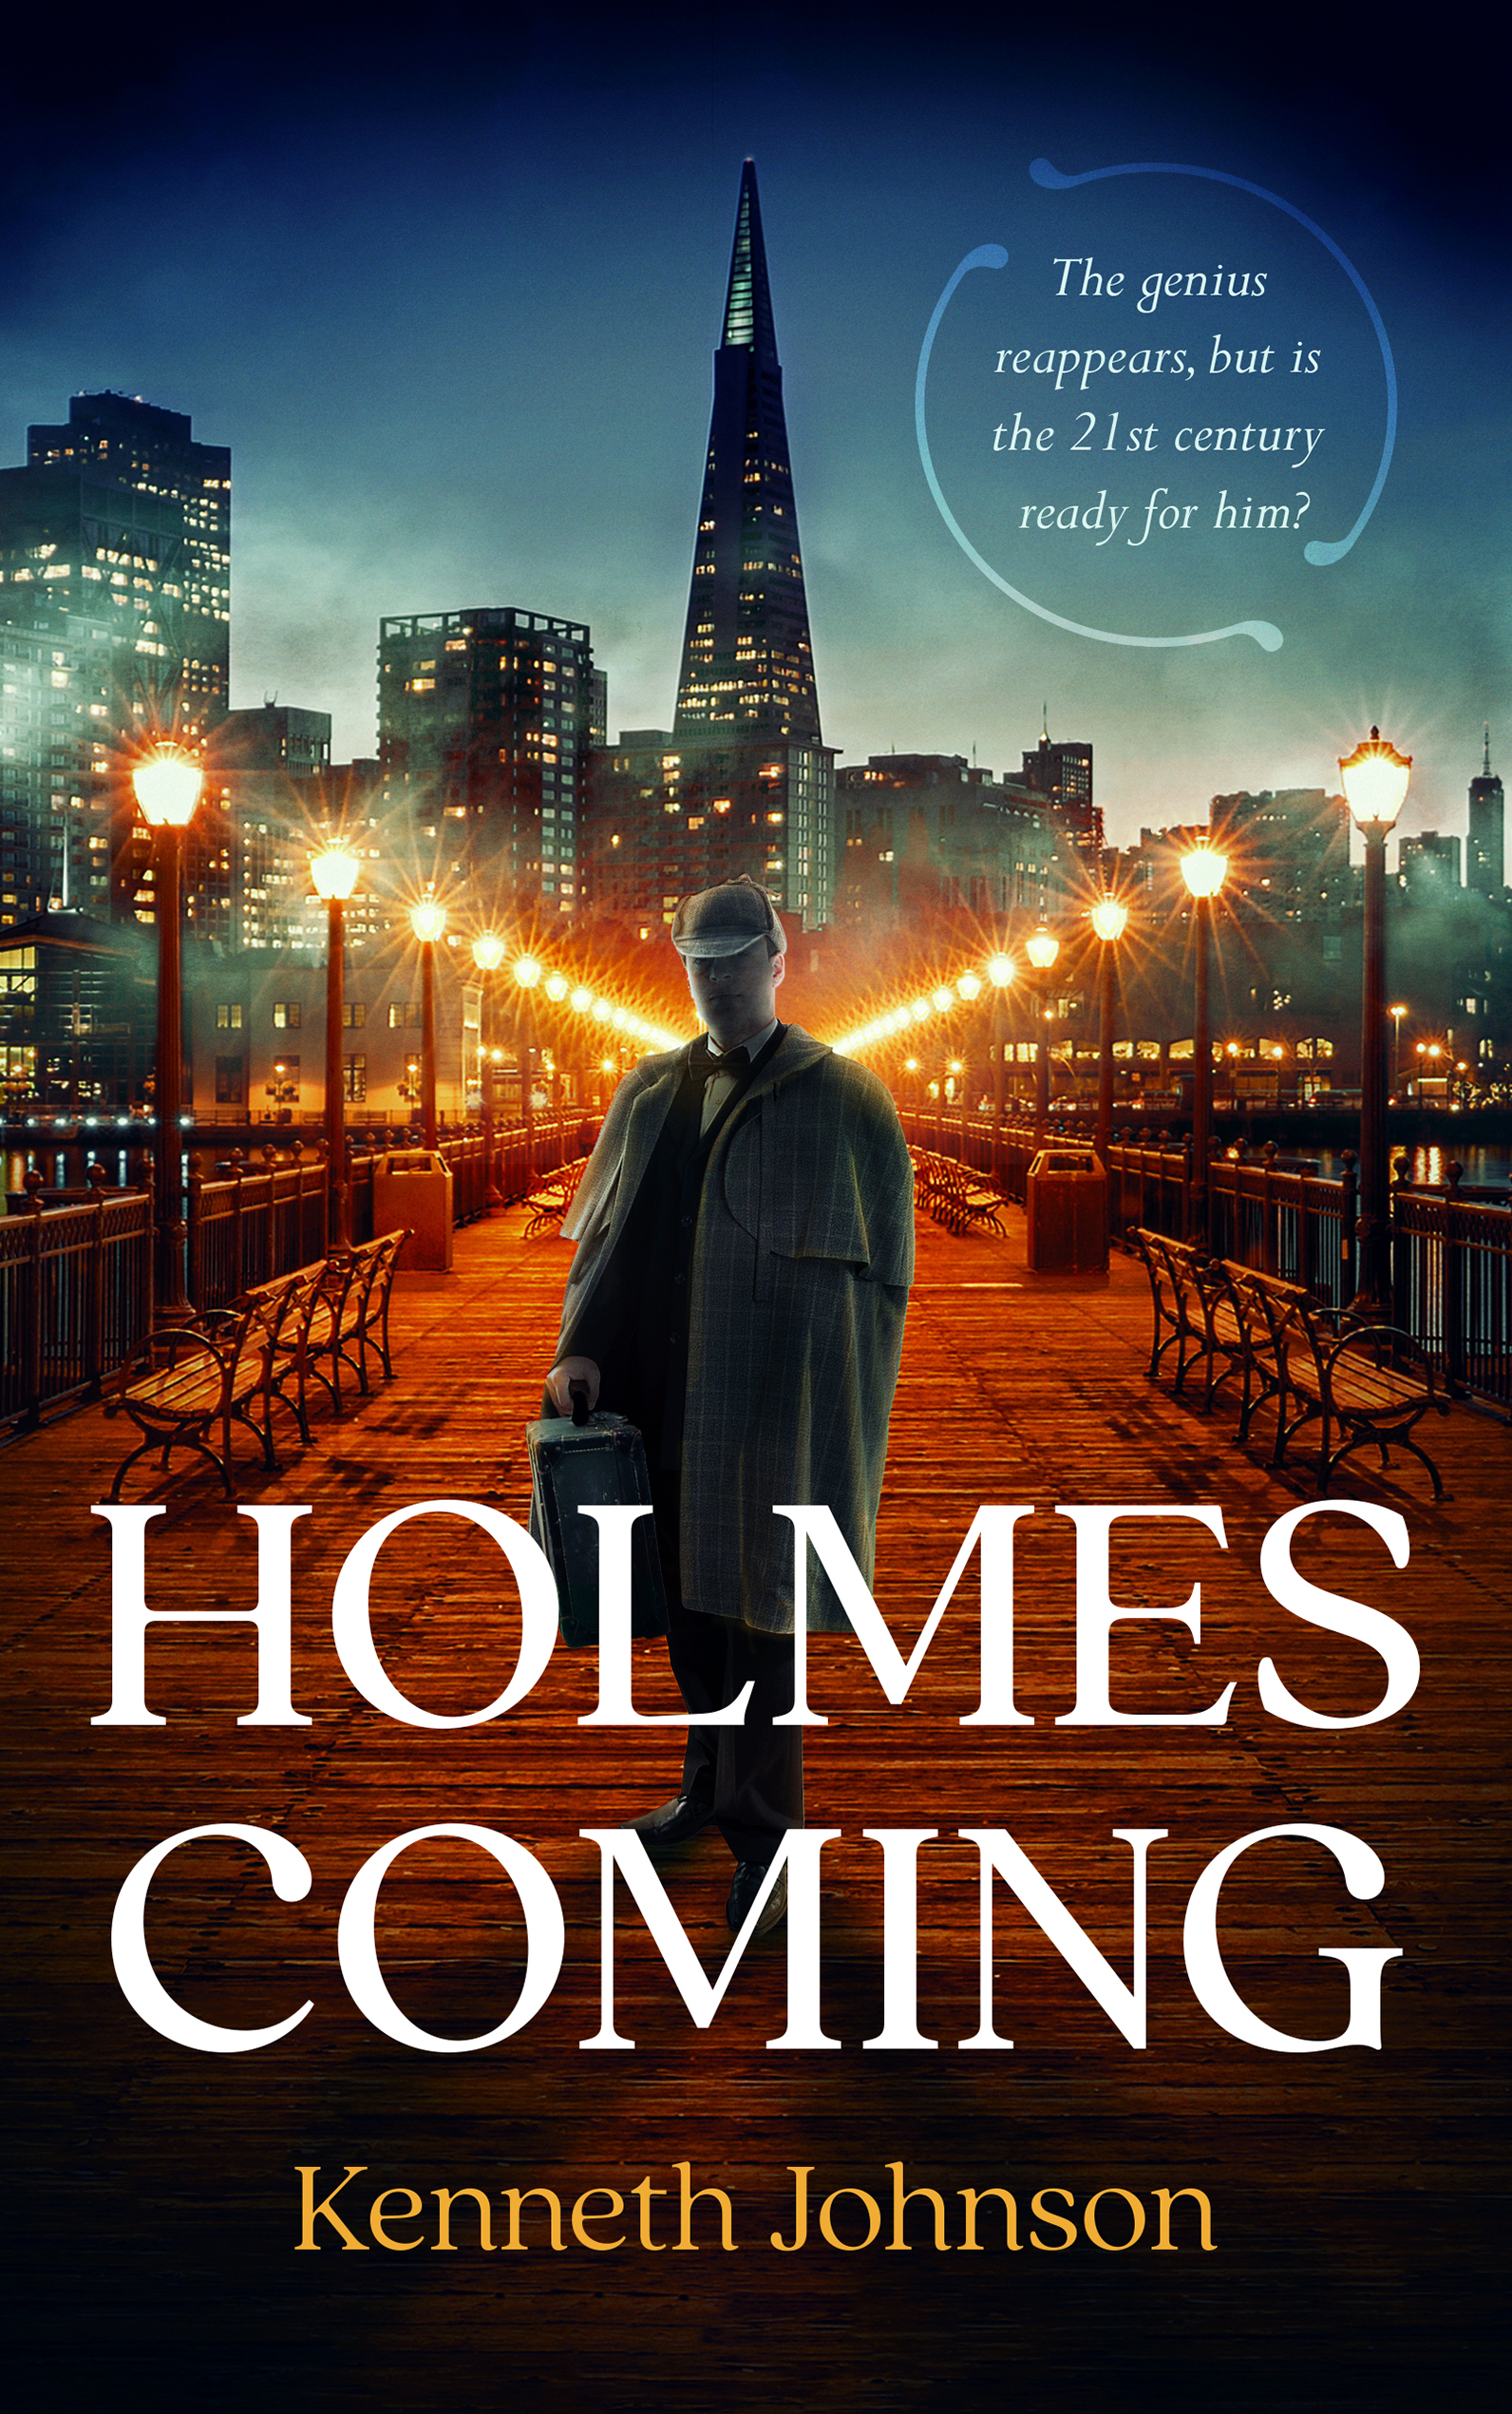 Holmes Coming by Kenneth Johnson